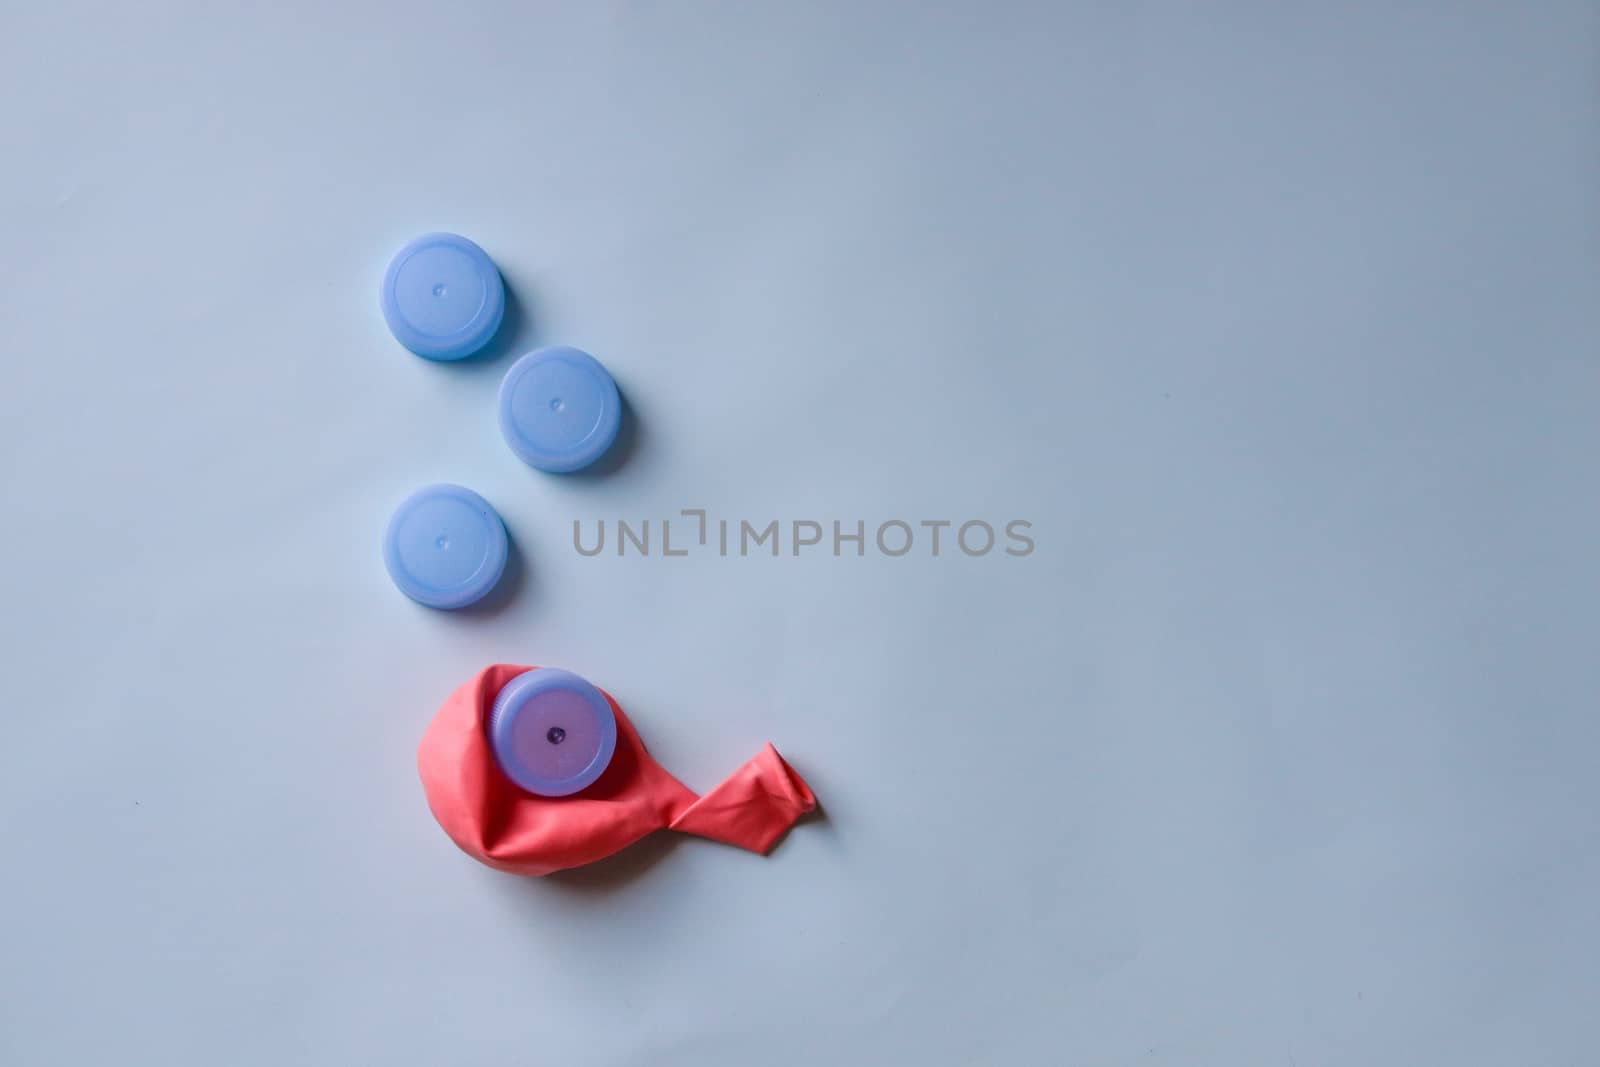 Conceptual still life photo showing the effects of plastic pollution on our oceans and the planet by Sonnet15